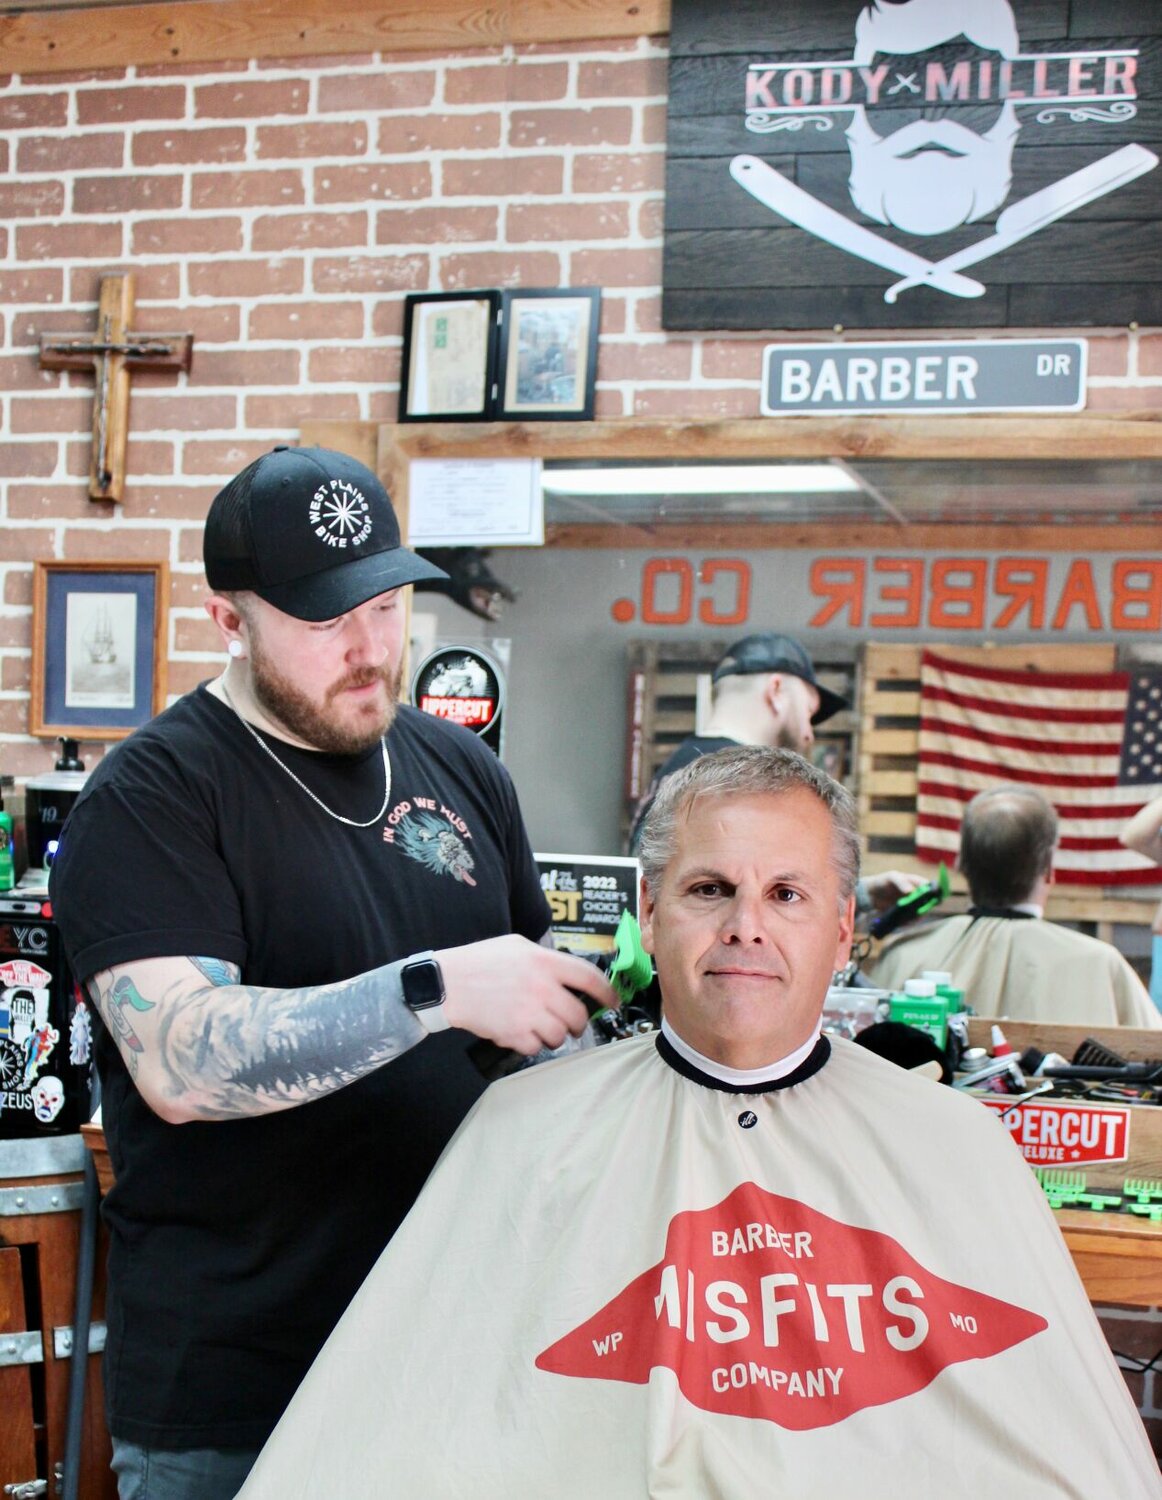 Misfits Barber Co. in downtown West Plains offers haircuts, shaves and beard grooming in a "man cave" setting. The business is open from 10 to 5 p.m. Tuesdays through Fridays and 10 a.m. to 2 p.m. Saturdays, closed Mondays and Sundays, at 301 Washington Ave. Walk-ins are welcome but appointments are preferred and may be made online by visiting the shop's website at misfitsbarber.co, by calling 417-293-5639, or through the Misfits Barber Co. Facebook page, @misfitsbarberco. Barbers are owner Kody Miller and Levi Cox. Here, Miller is starting on a haircut for Ozarks Healthcare President and CEO Tom Keller.